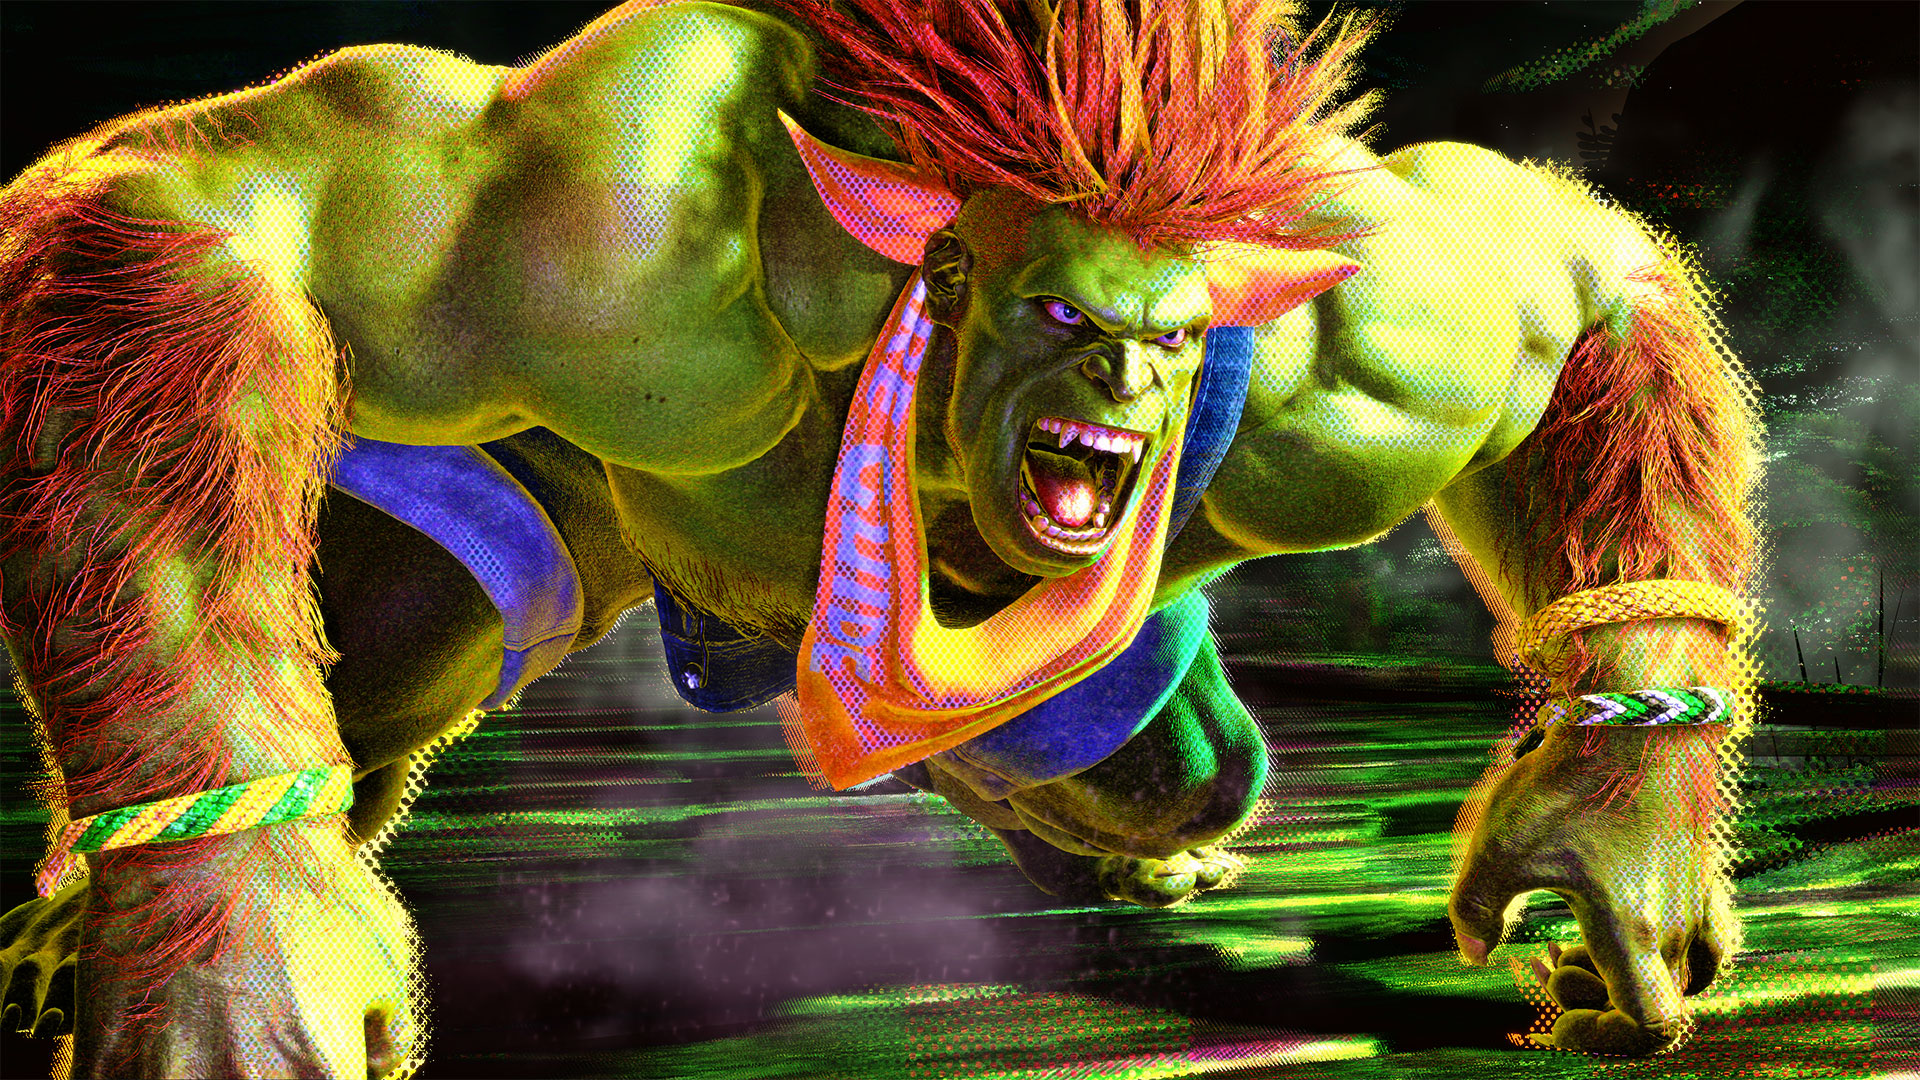 How to play Blanka in Street Fighter V - Moves Guide